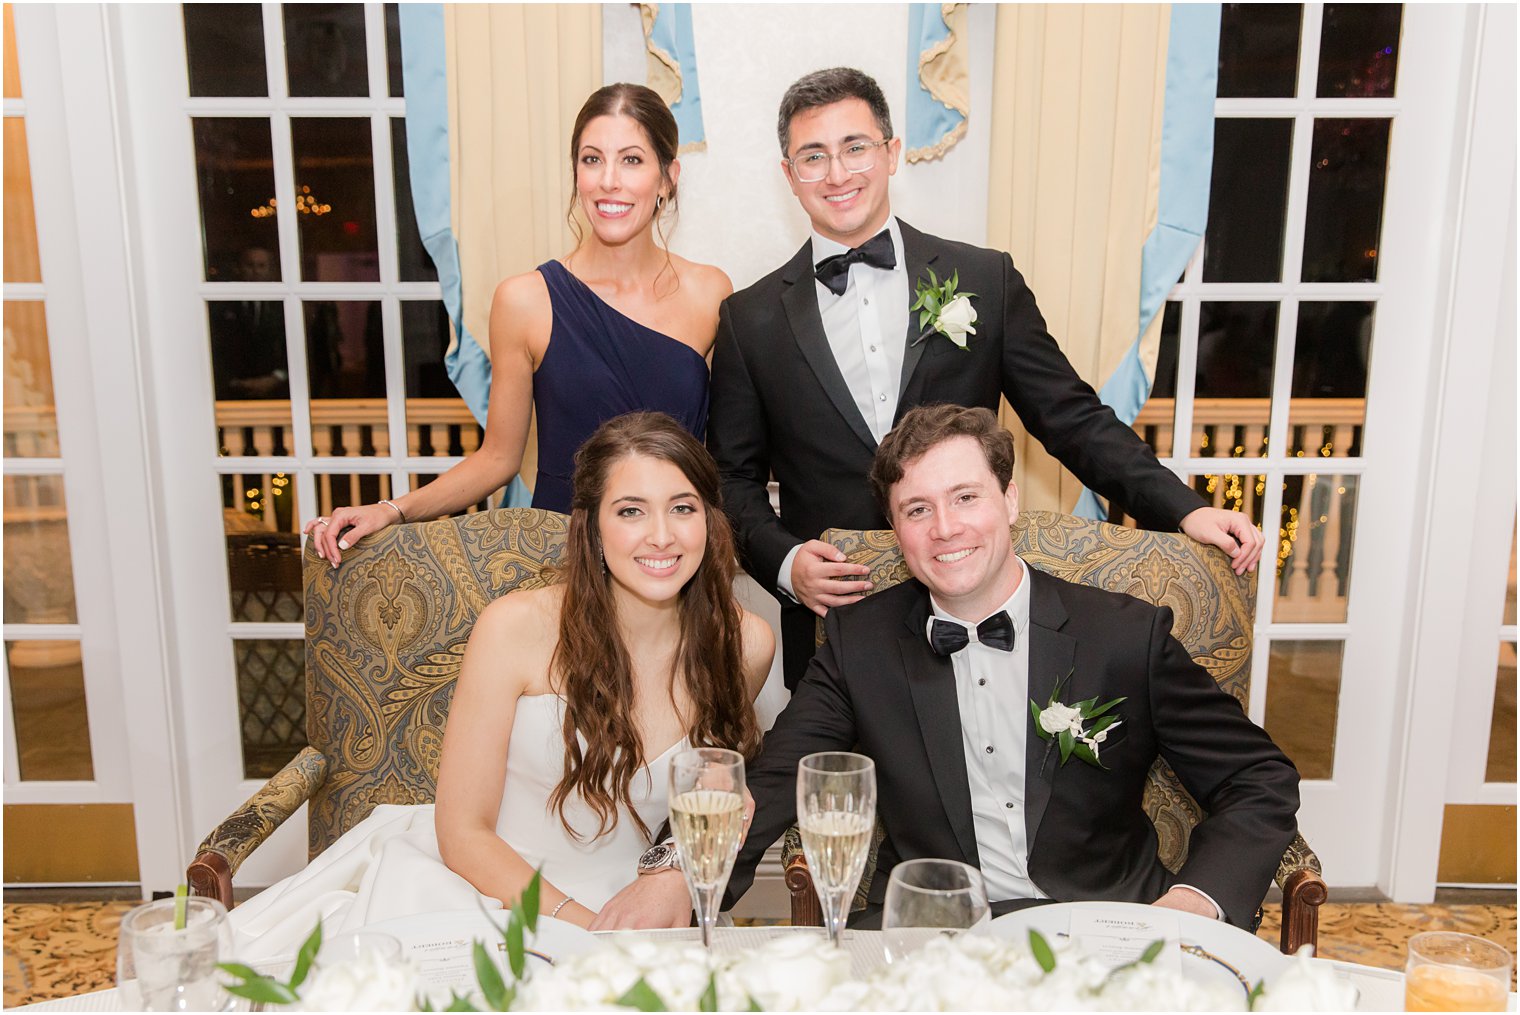 maid of honor and best man pose with newlyweds at Farmingdale NJ wedding reception